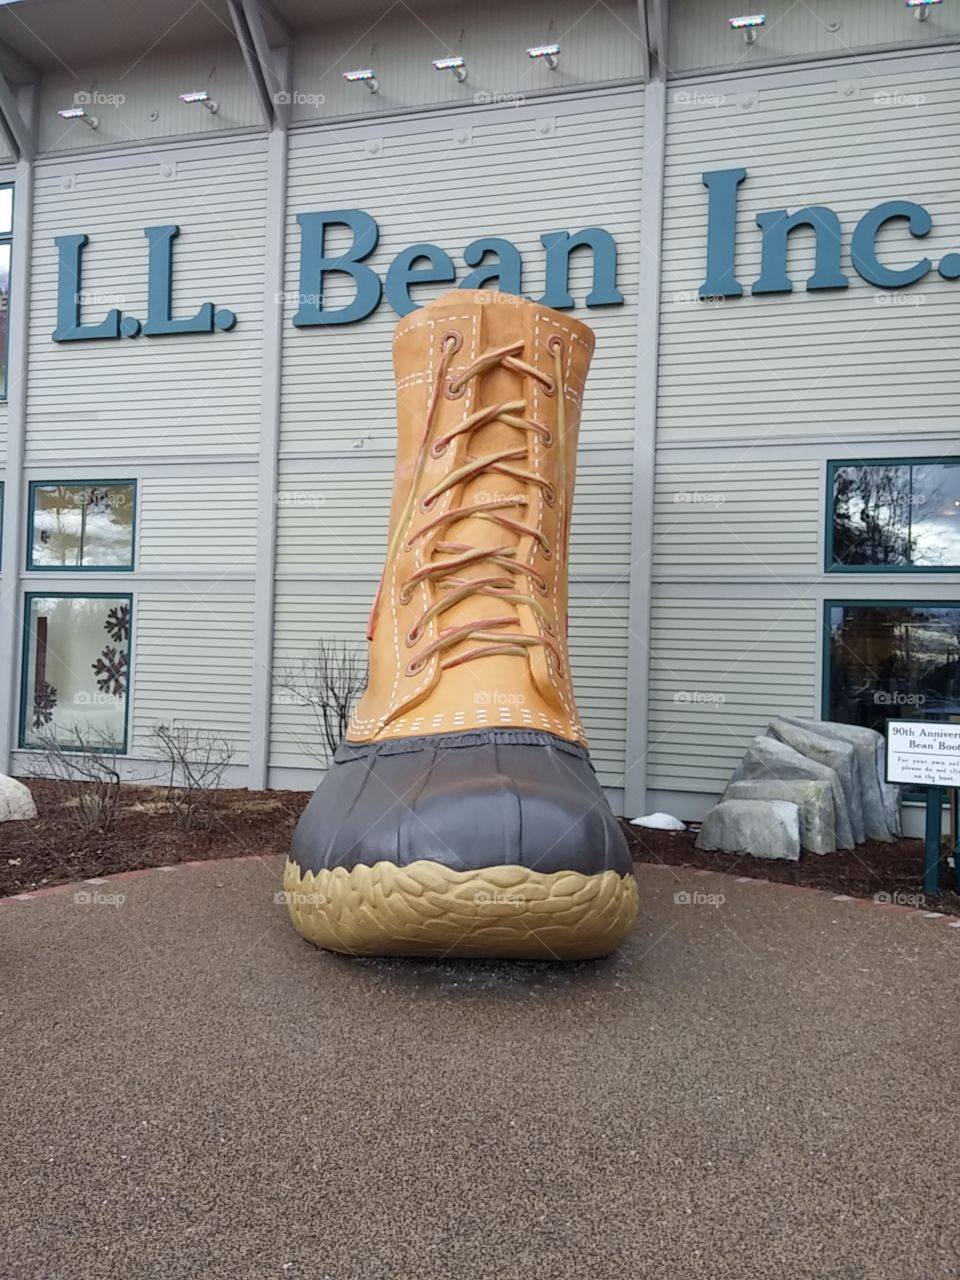 Biggest Boot I Ever Saw